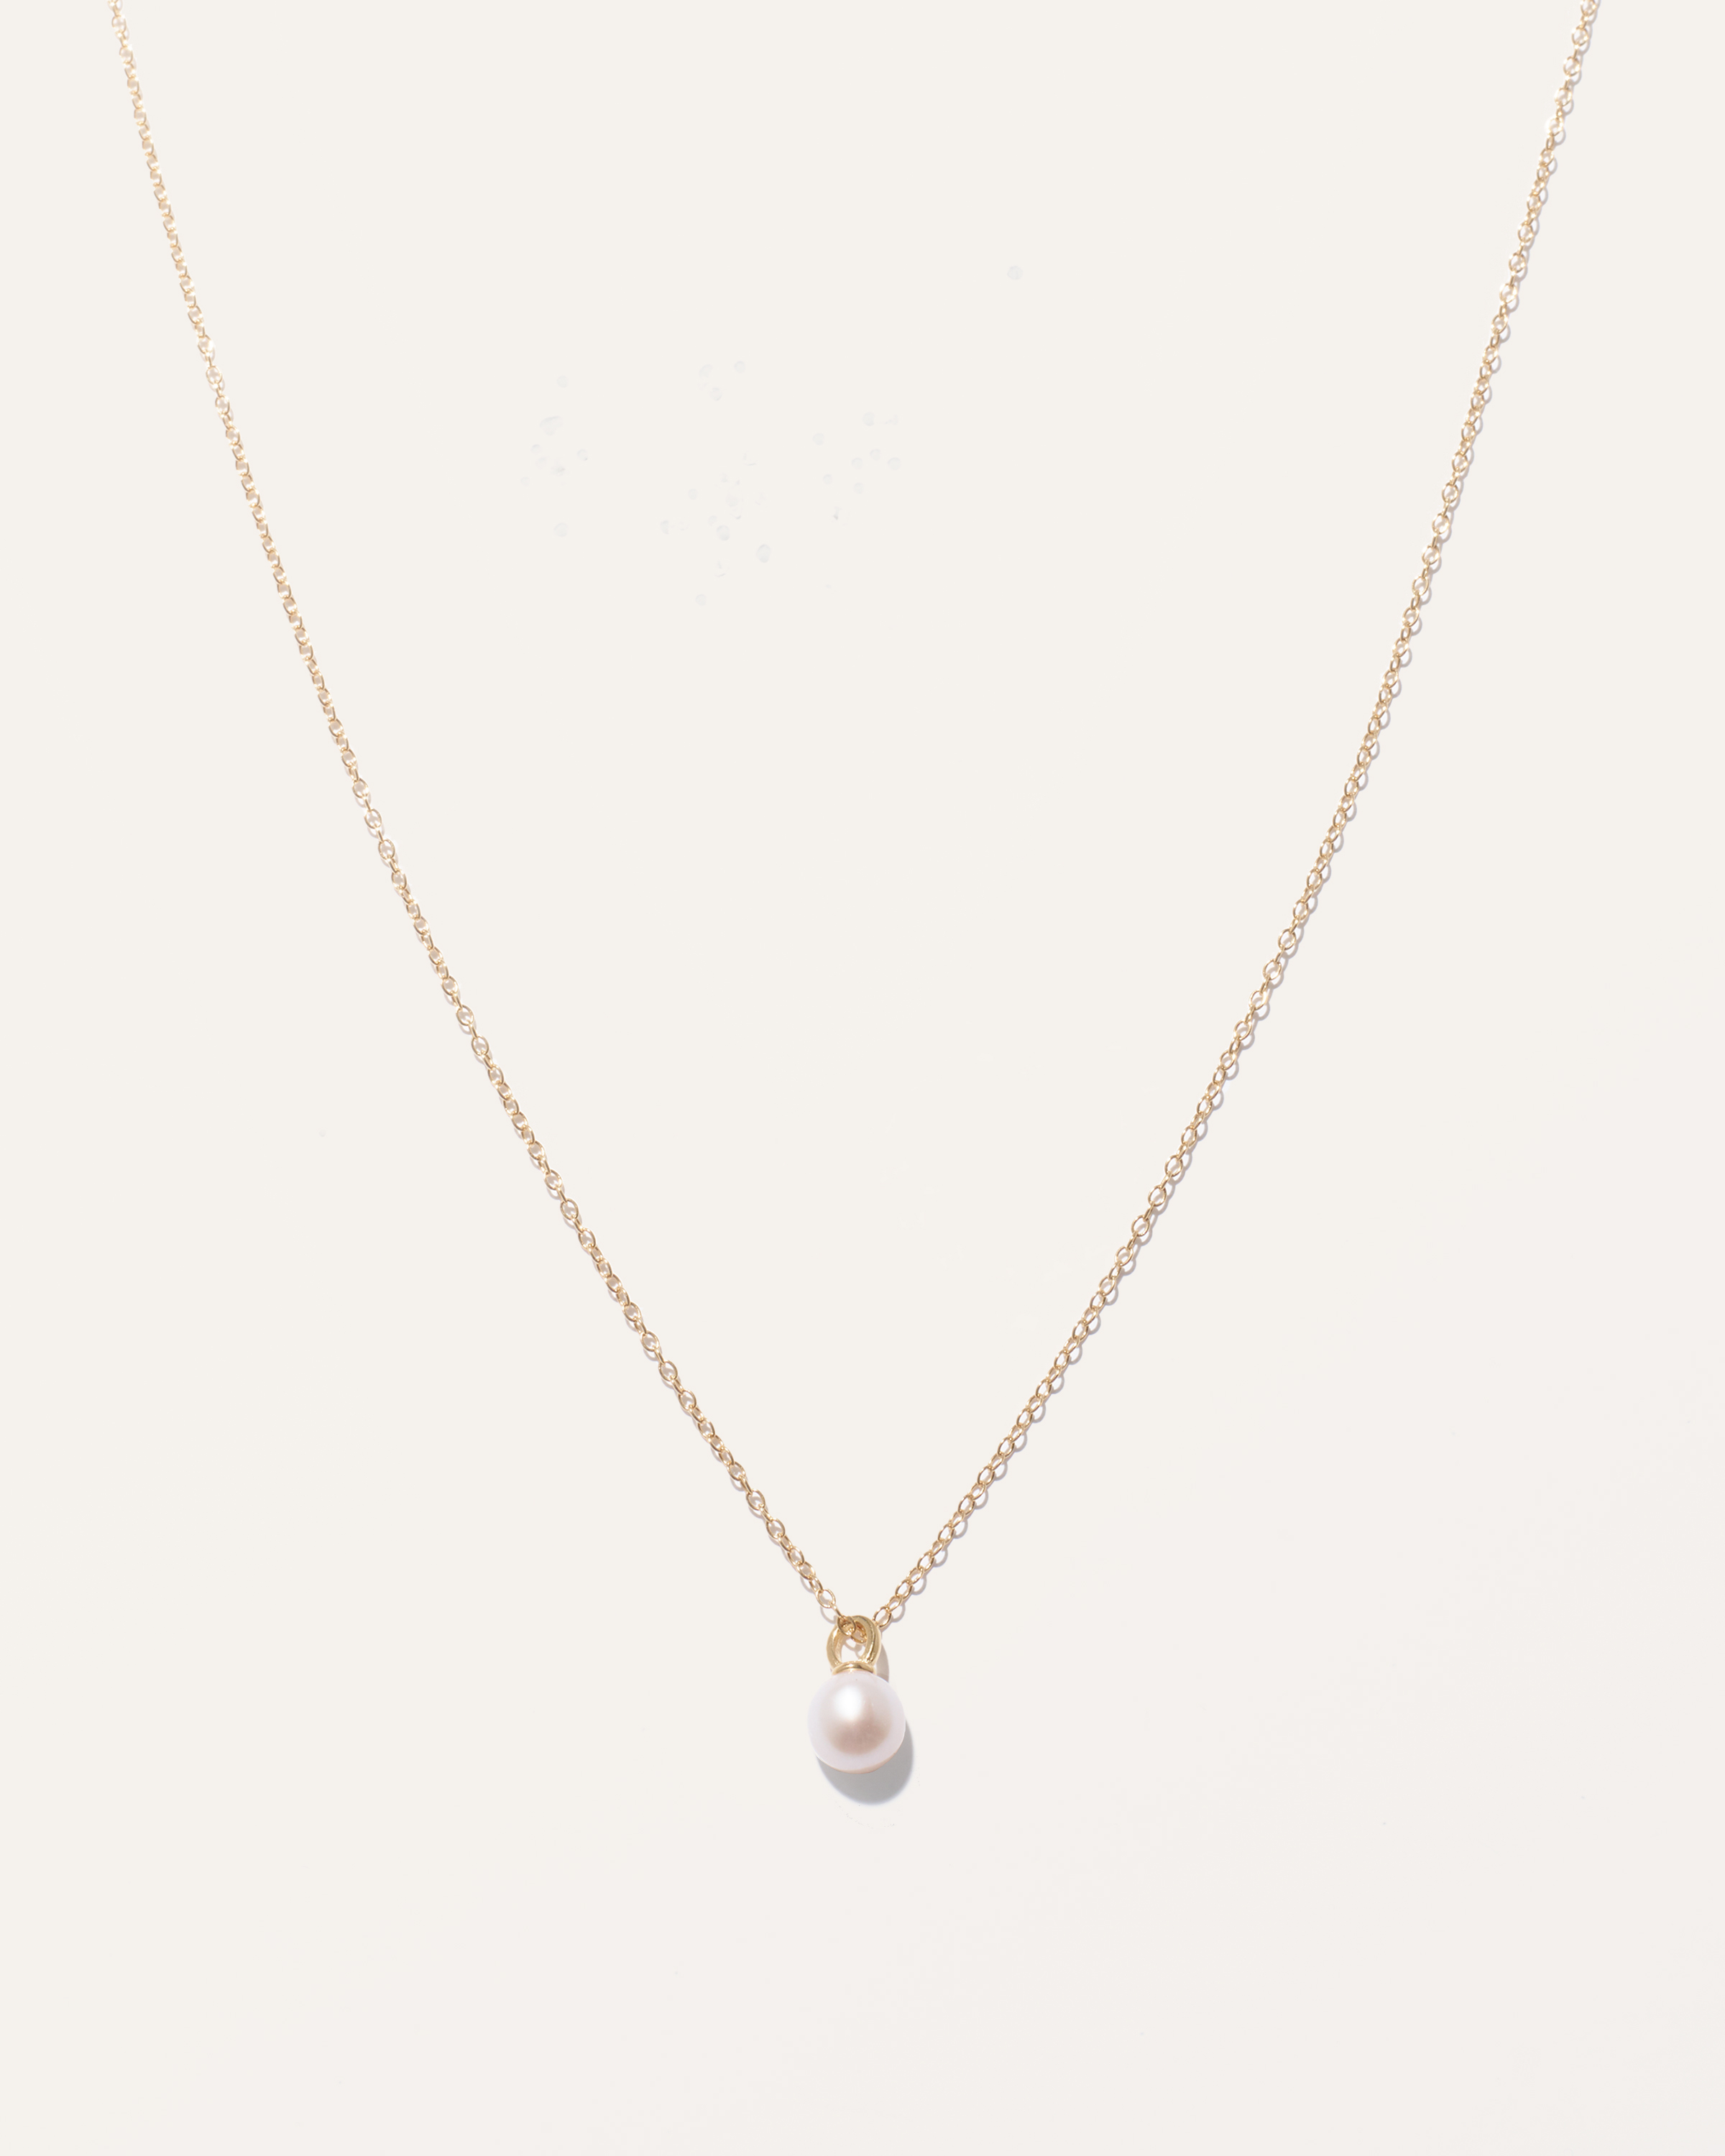 Women's Dainty Pearl Pendant Necklace in Gold Vermeil by Quince